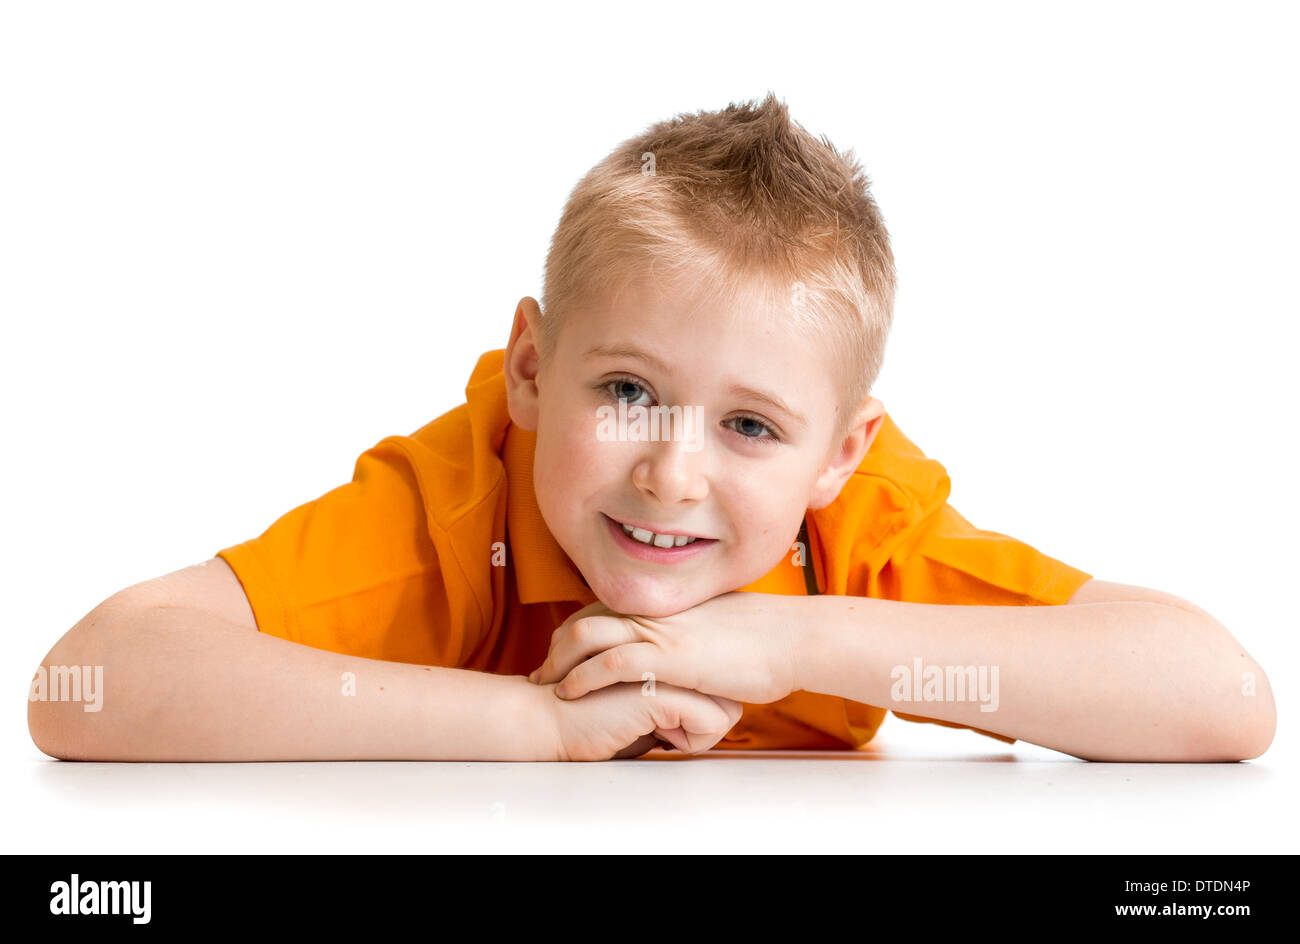 Smiling boy lying on floor isolated on white Banque D'Images